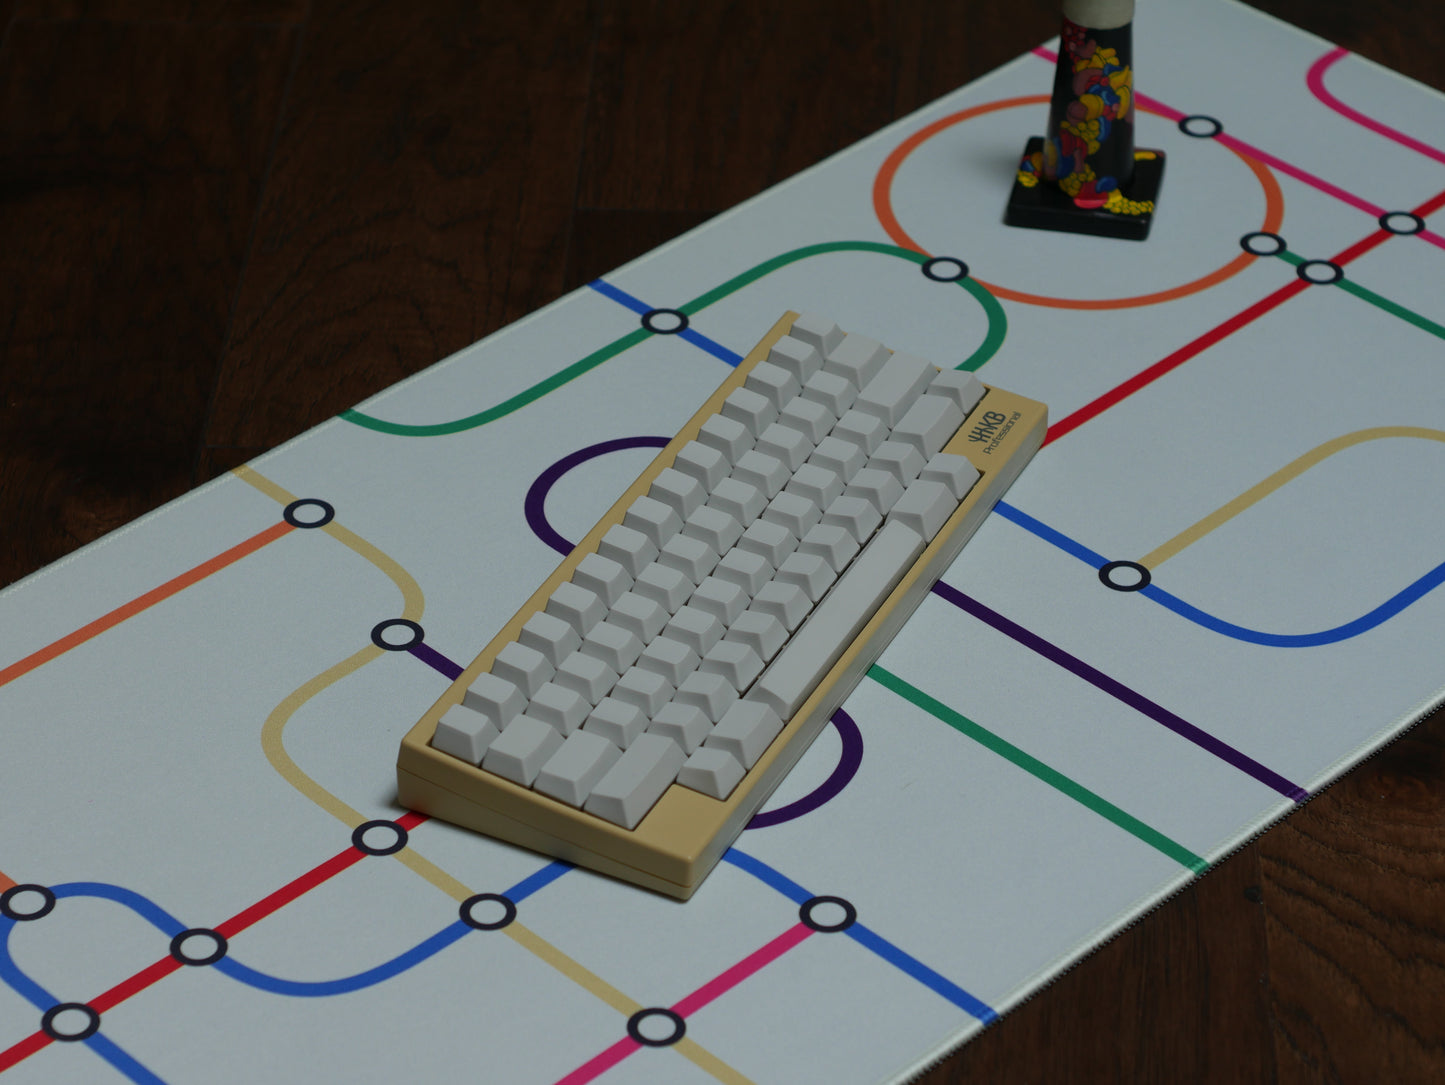 The subway transit desk mat with a white background and colorful lines. A beige keyboard with white keycaps sits on the desk mat.